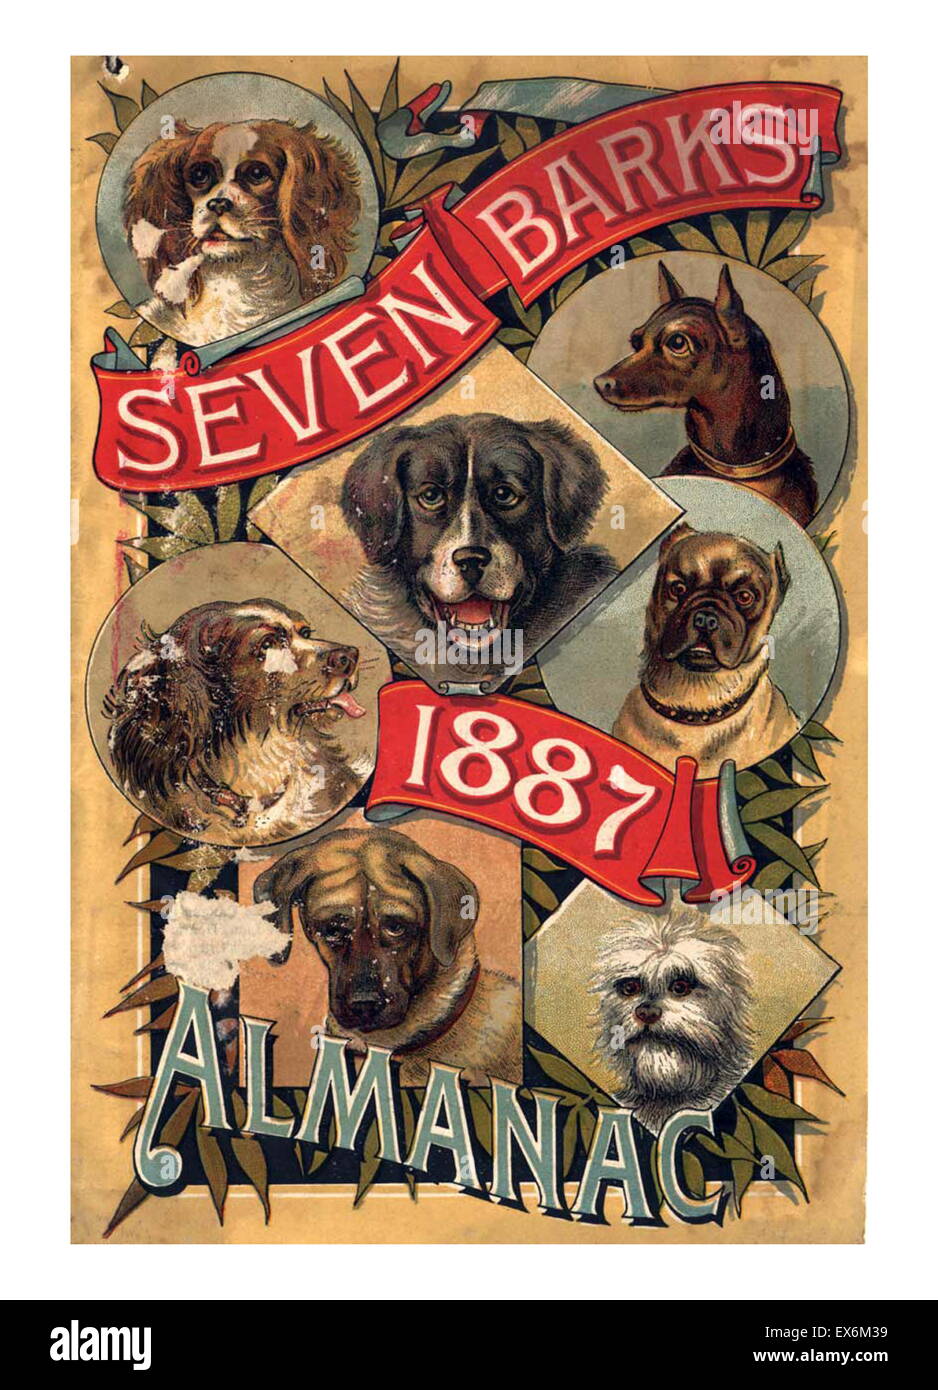 By the end of the 19th century, at least one patent medicine almanac was printed for every two Americans. While they included the main elements of the traditional almanac, their primary purpose was to sell their product. From their simple beginning, they Stock Photo